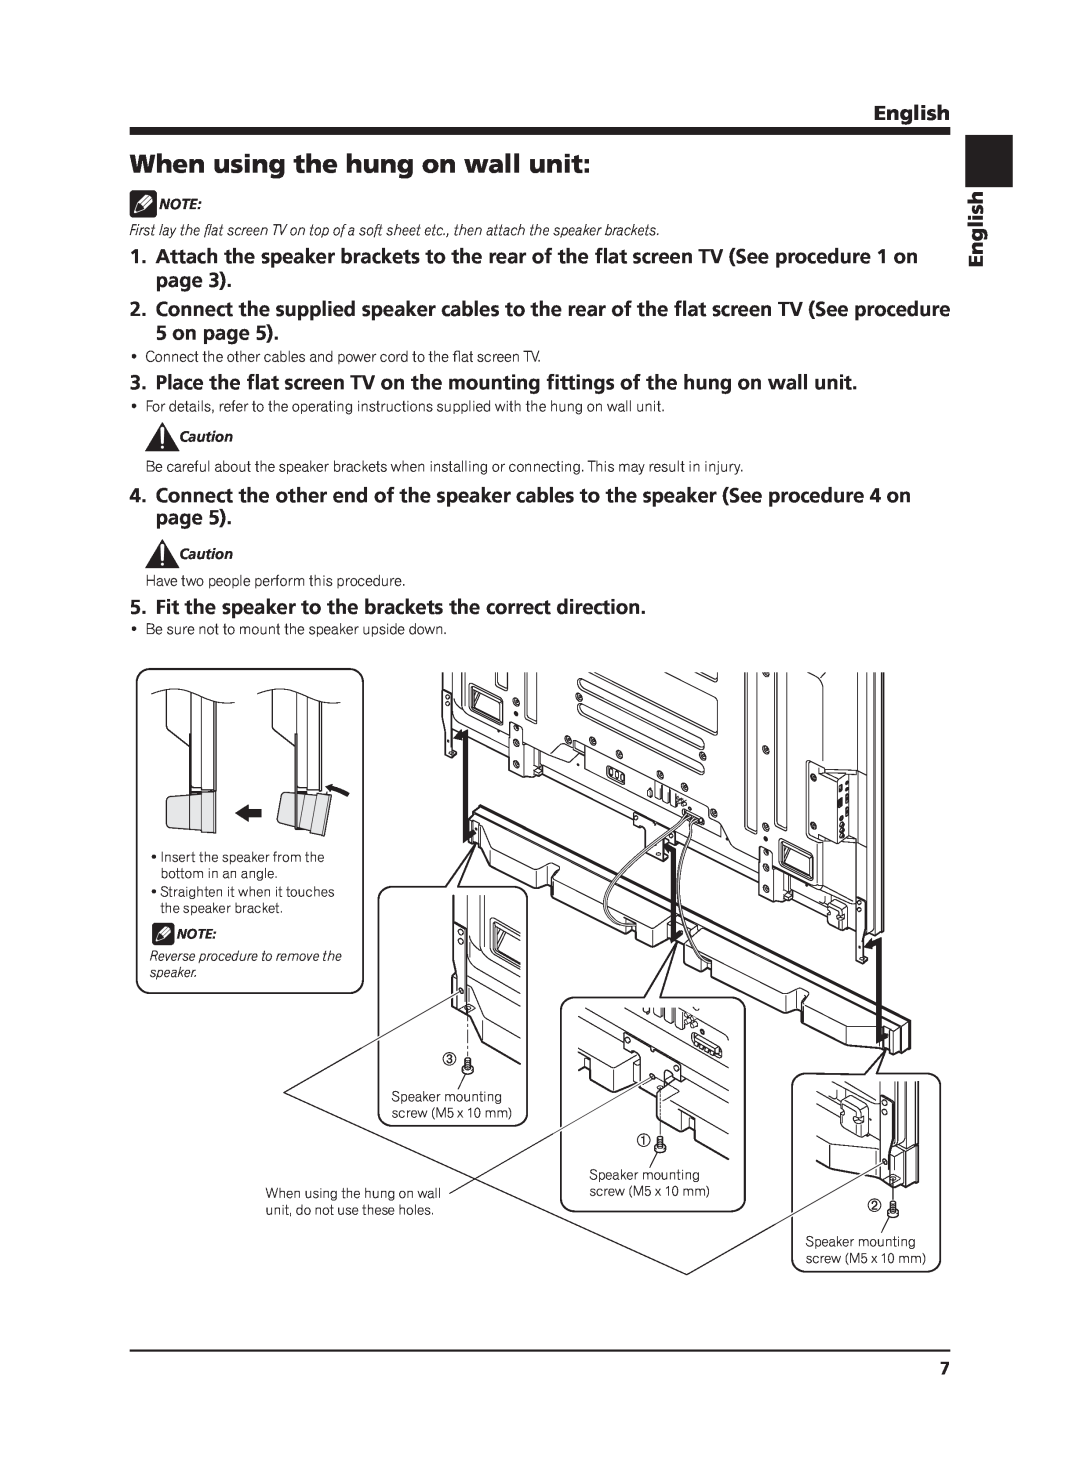 Pioneer PDP-S65 manual When using the hung on wall unit, on page, English 